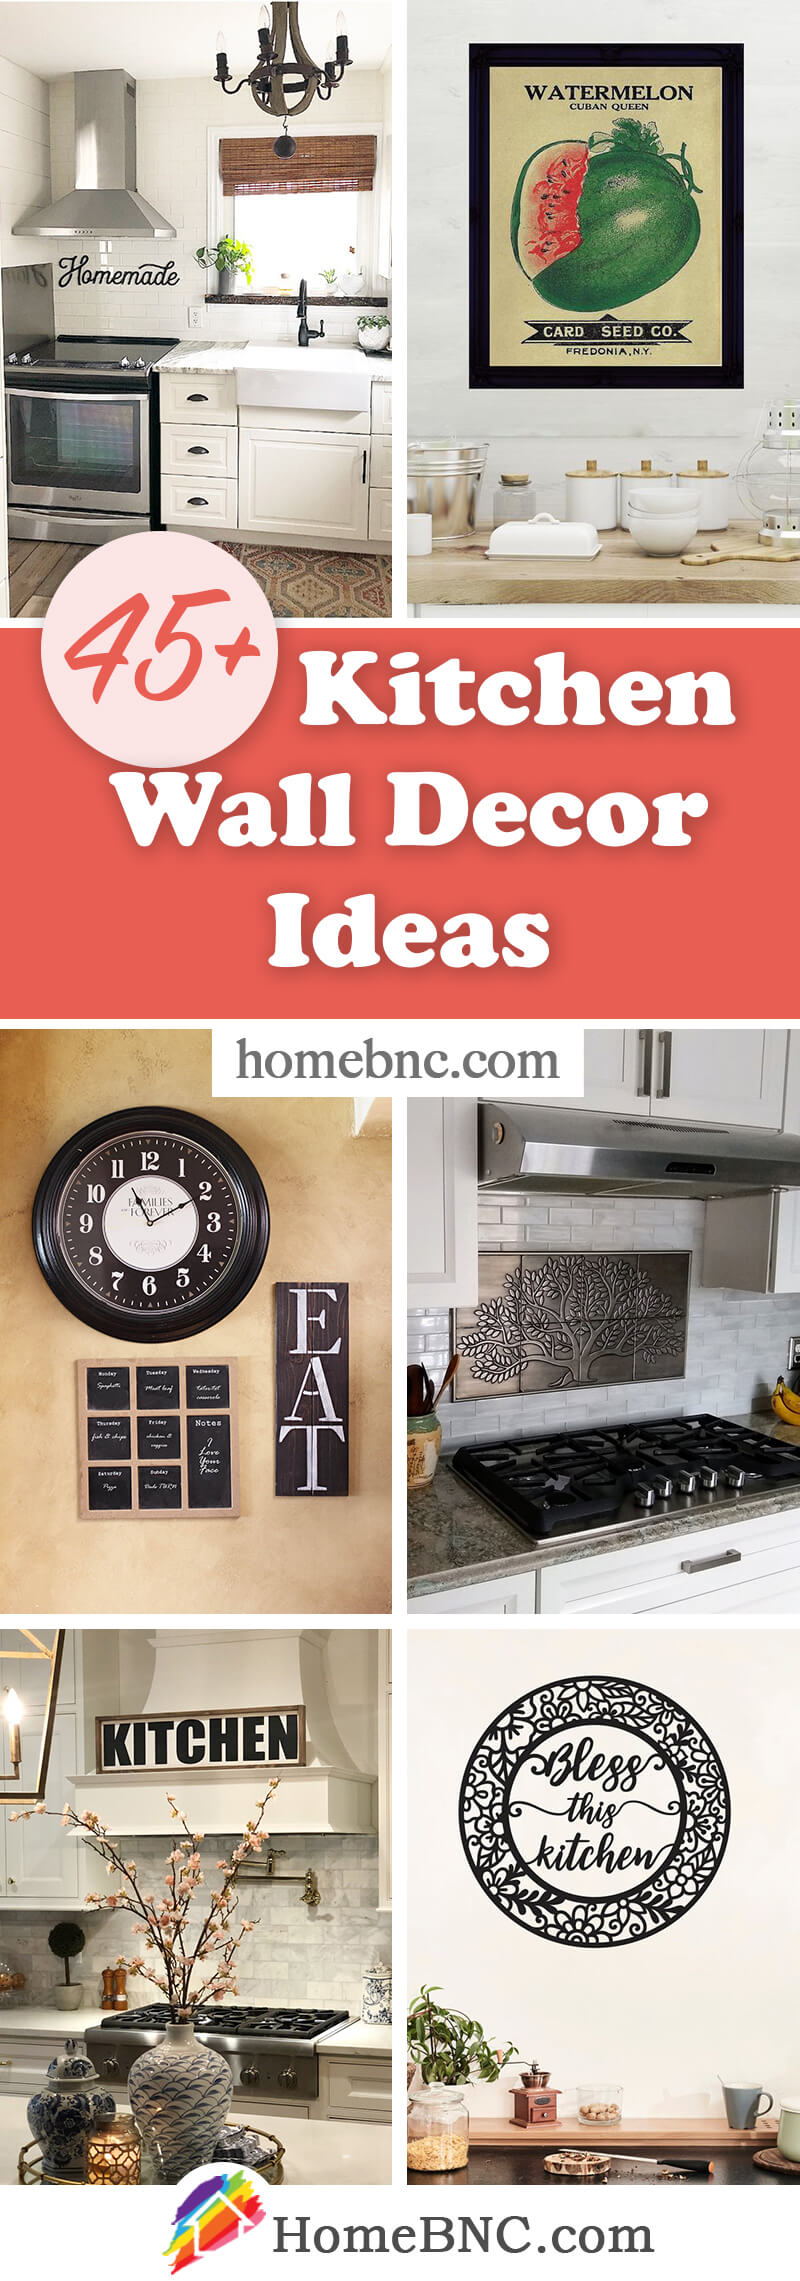 20+ Best Kitchen Wall Decor Ideas and Designs for 20